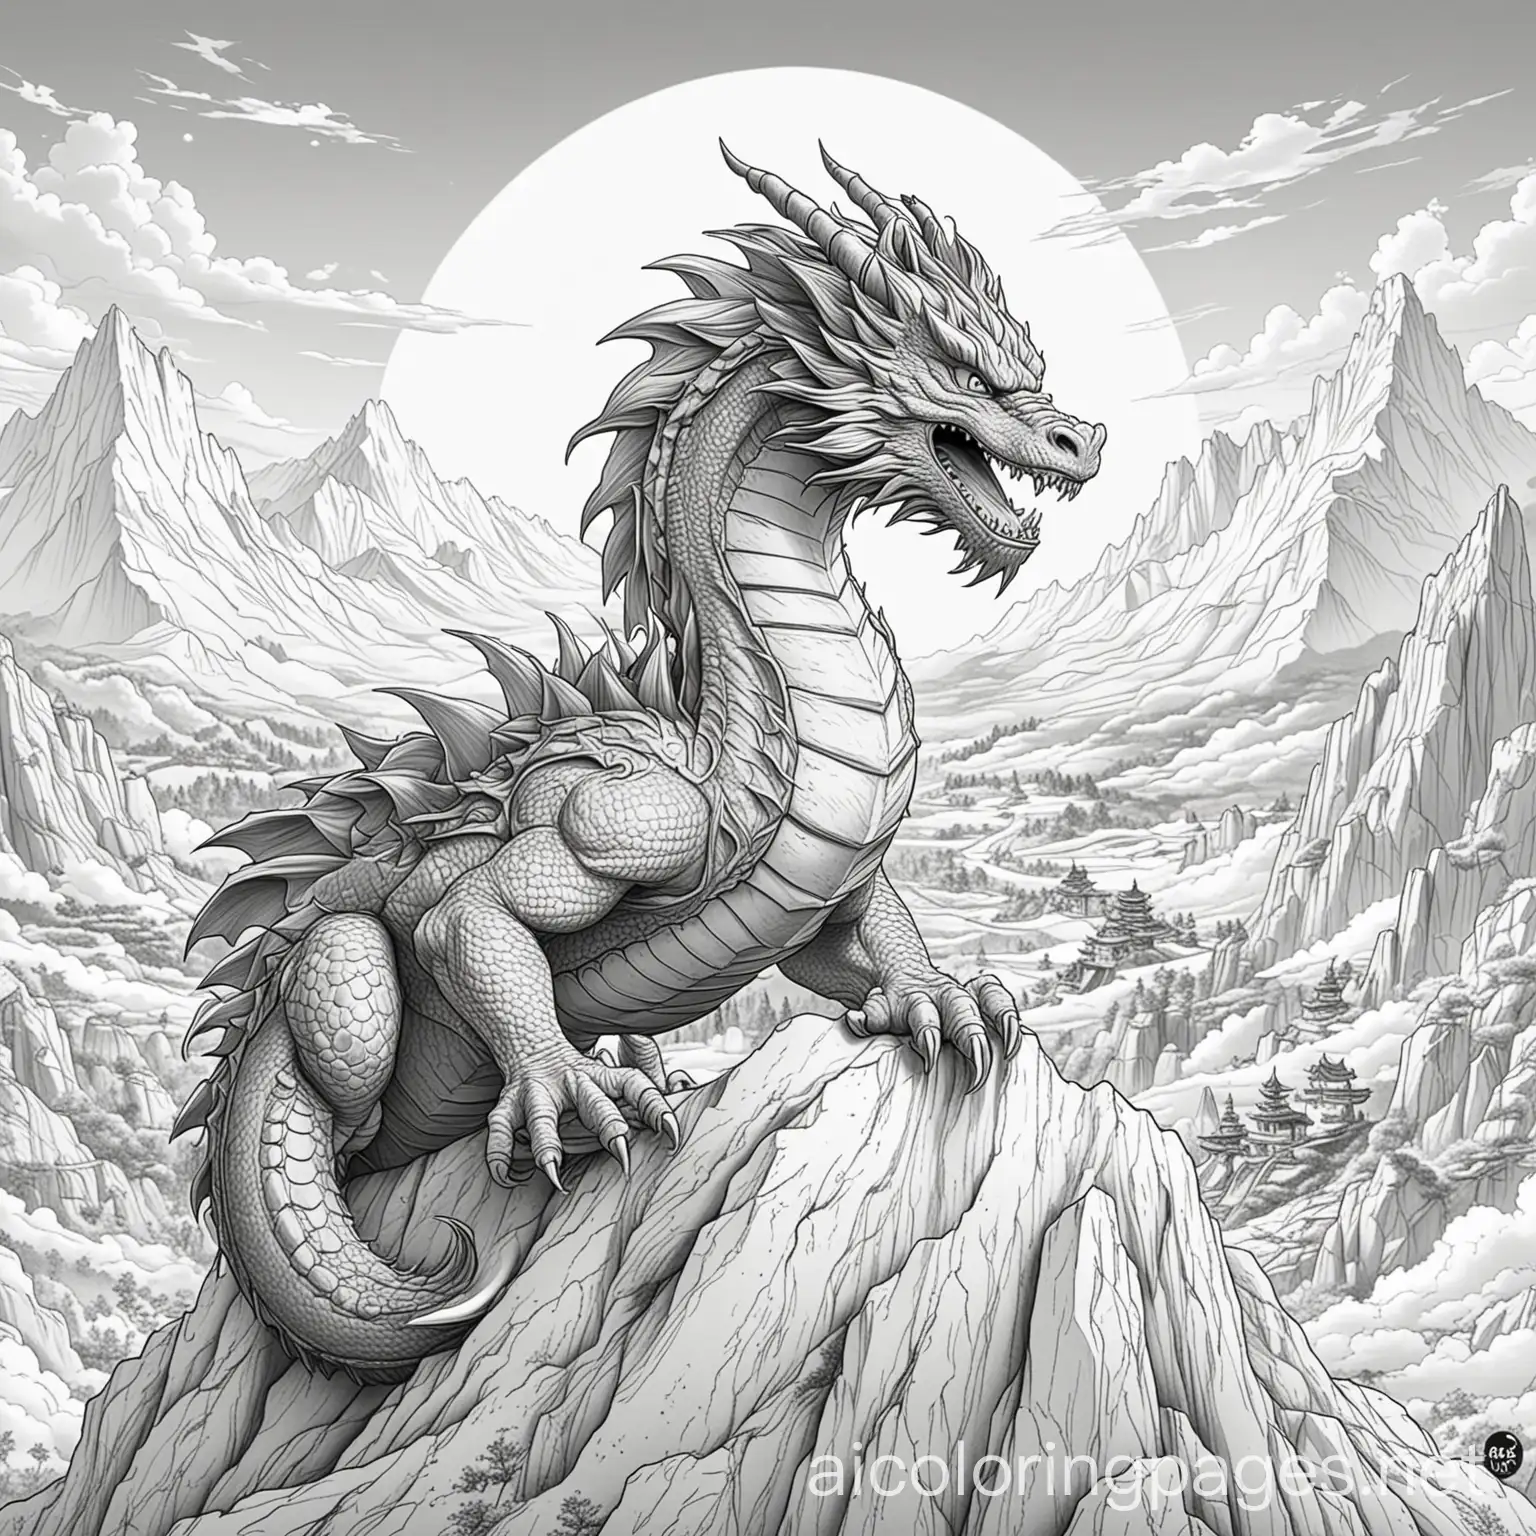 A DRAGON ON A MOUNTAIN WITH GOKU, Coloring Page, black and white, line art, white background, Simplicity, Ample White Space. The background of the coloring page is plain white to make it easy for young children to color within the lines. The outlines of all the subjects are easy to distinguish, making it simple for kids to color without too much difficulty